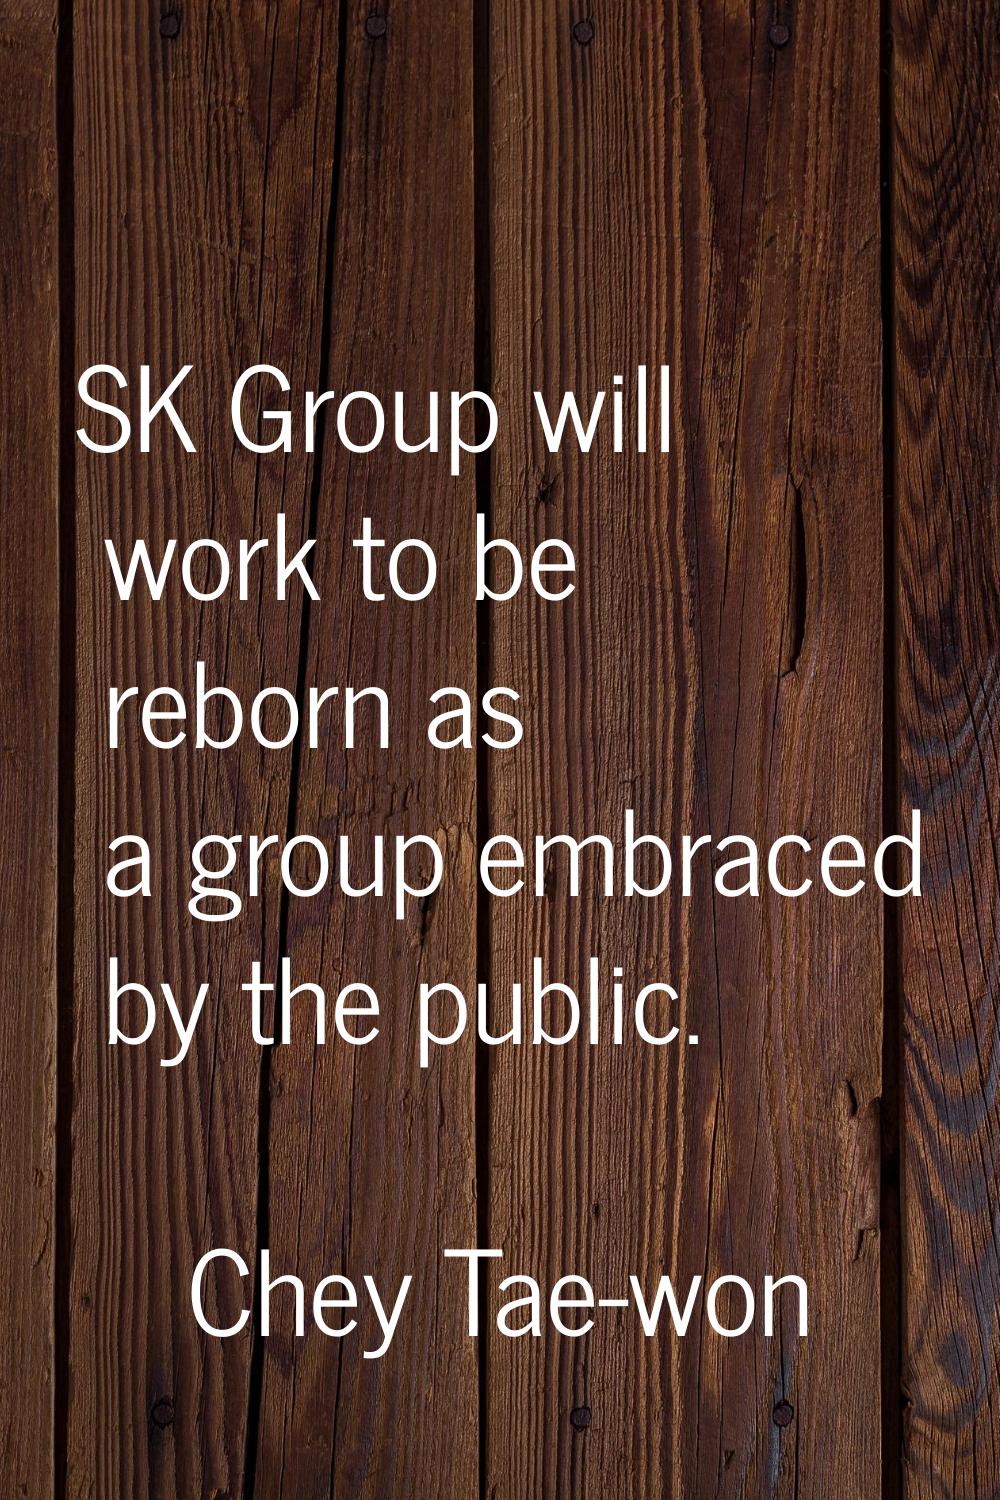 SK Group will work to be reborn as a group embraced by the public.